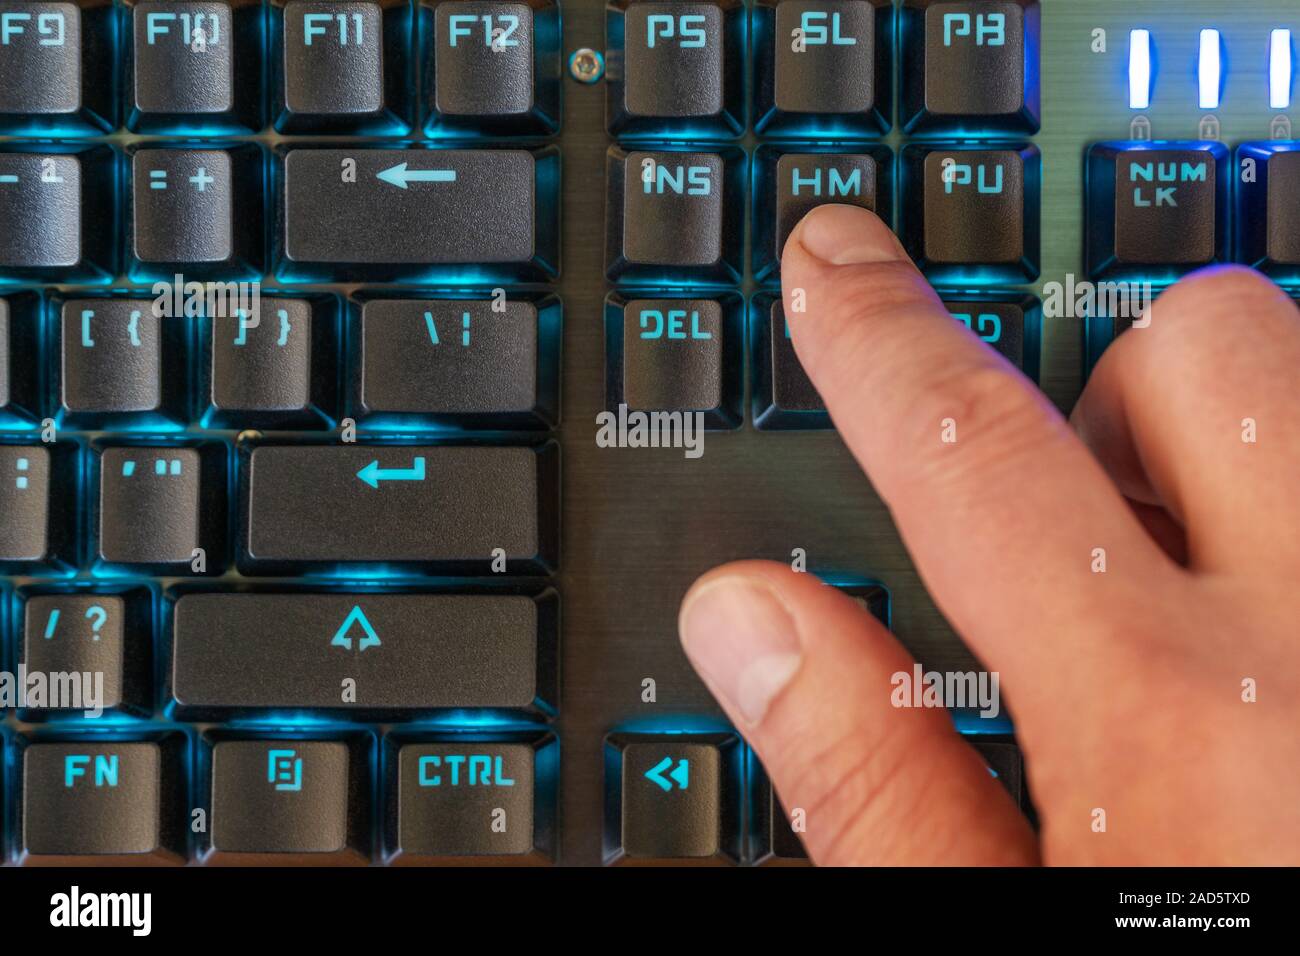 Male Finger Presses The Home Key On A Black Keyboard With Blue Backlight Stock Photo Alamy